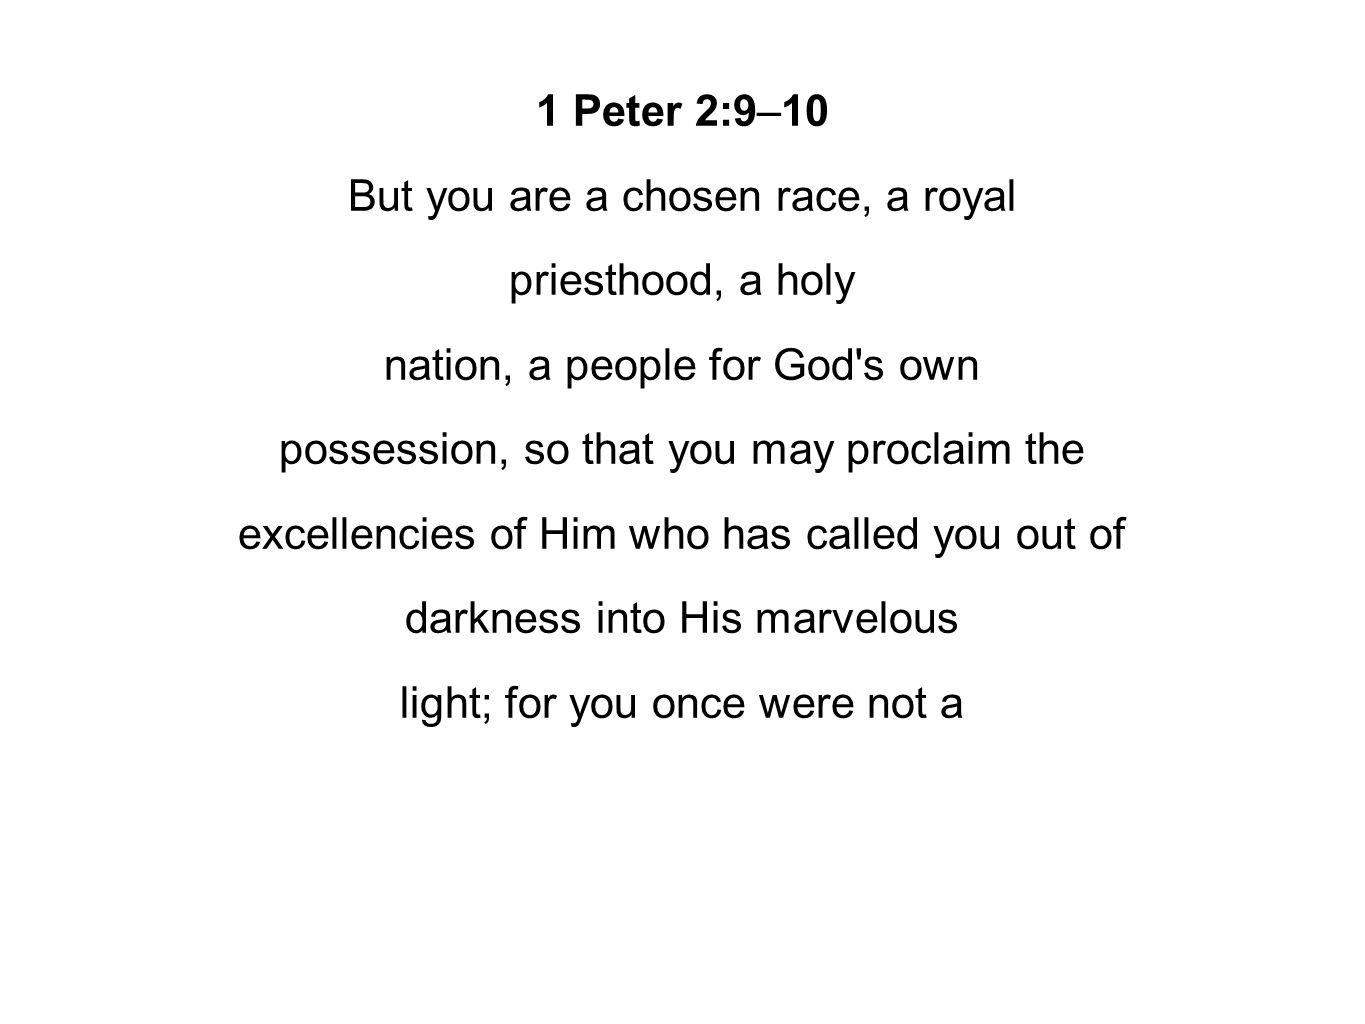 1 Peter 2:9–10 But you are a chosen race, a royal priesthood, a holy nation, a people for God s own possession, so that you may proclaim the excellencies of Him who has called you out of darkness into His marvelous light; for you once were not a